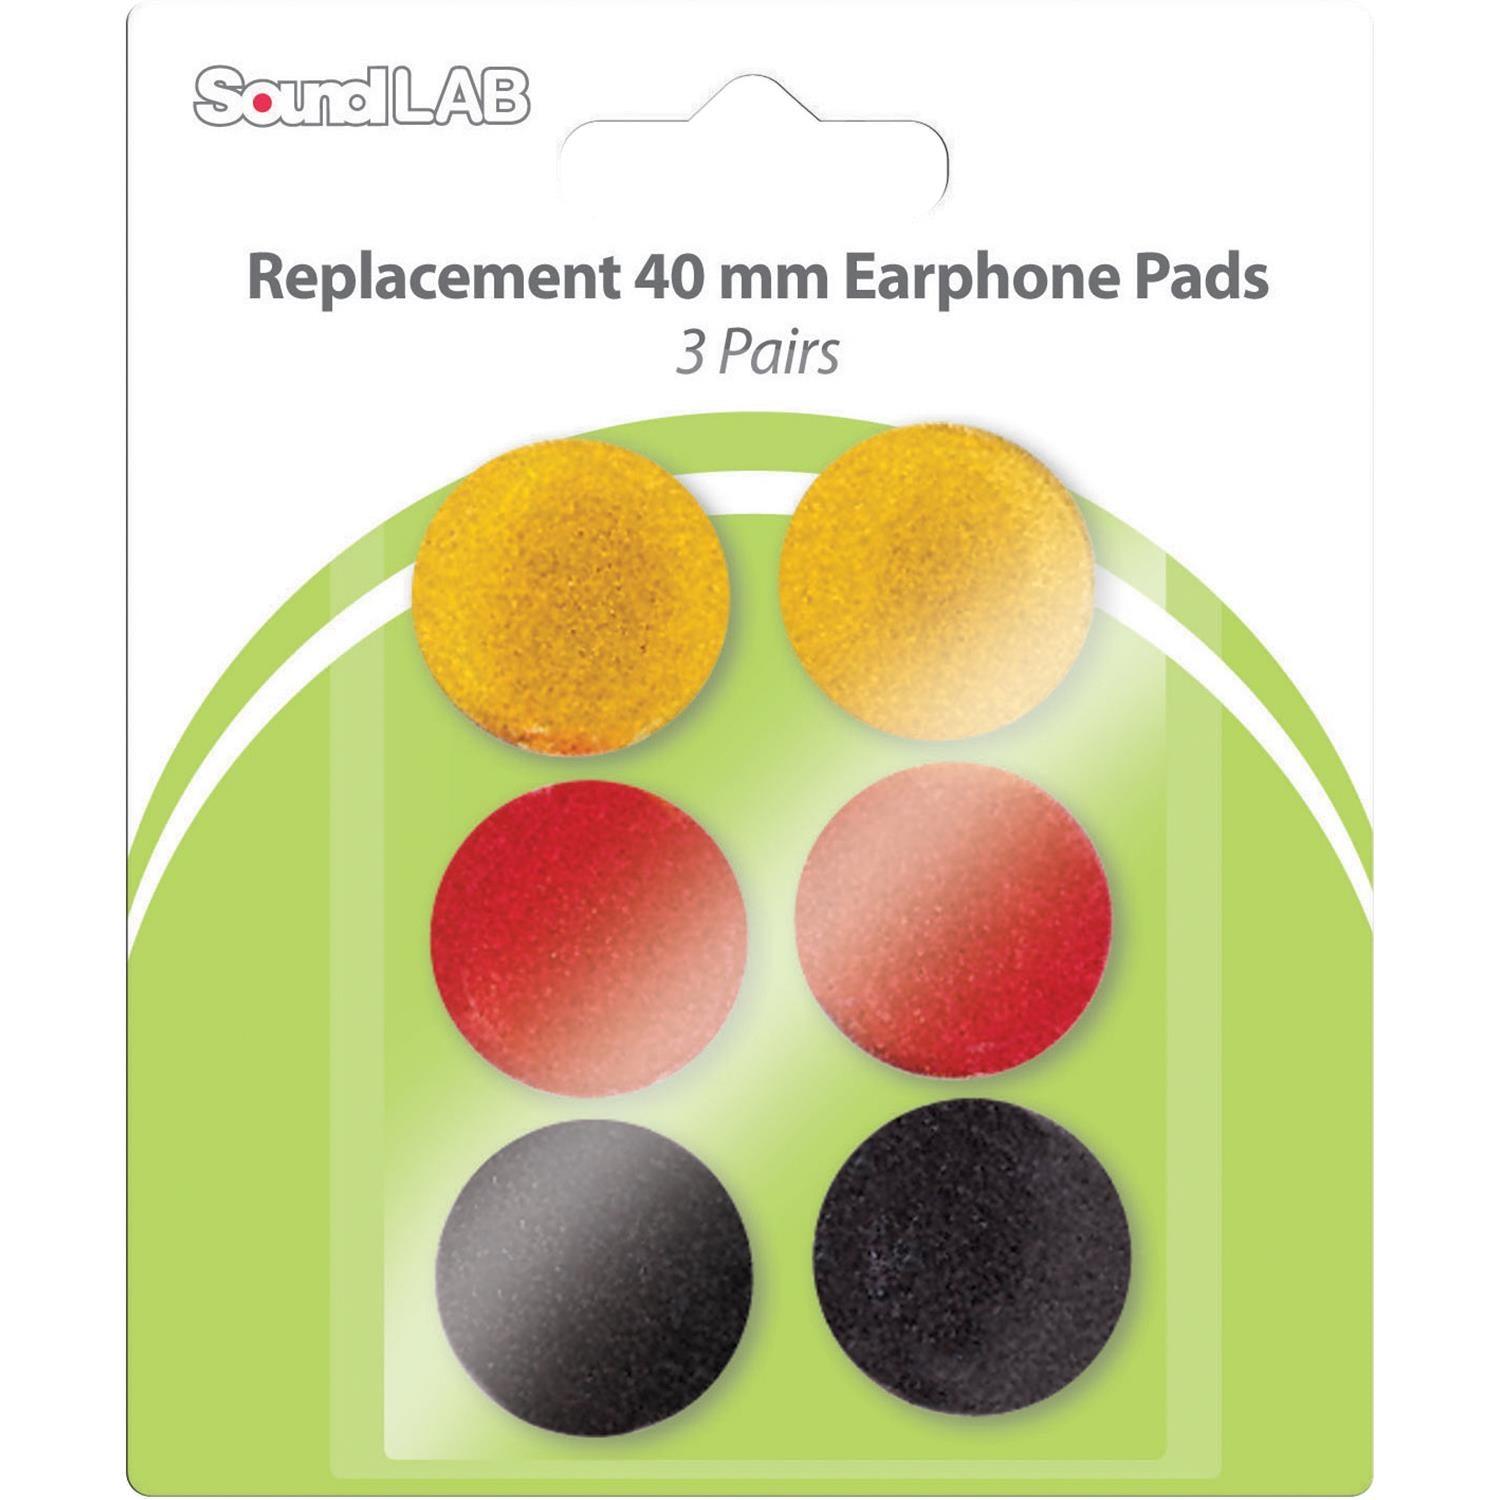 3 x Soundlab Coloured Replacement Ear phone Pads 40mm - DY Pro Audio